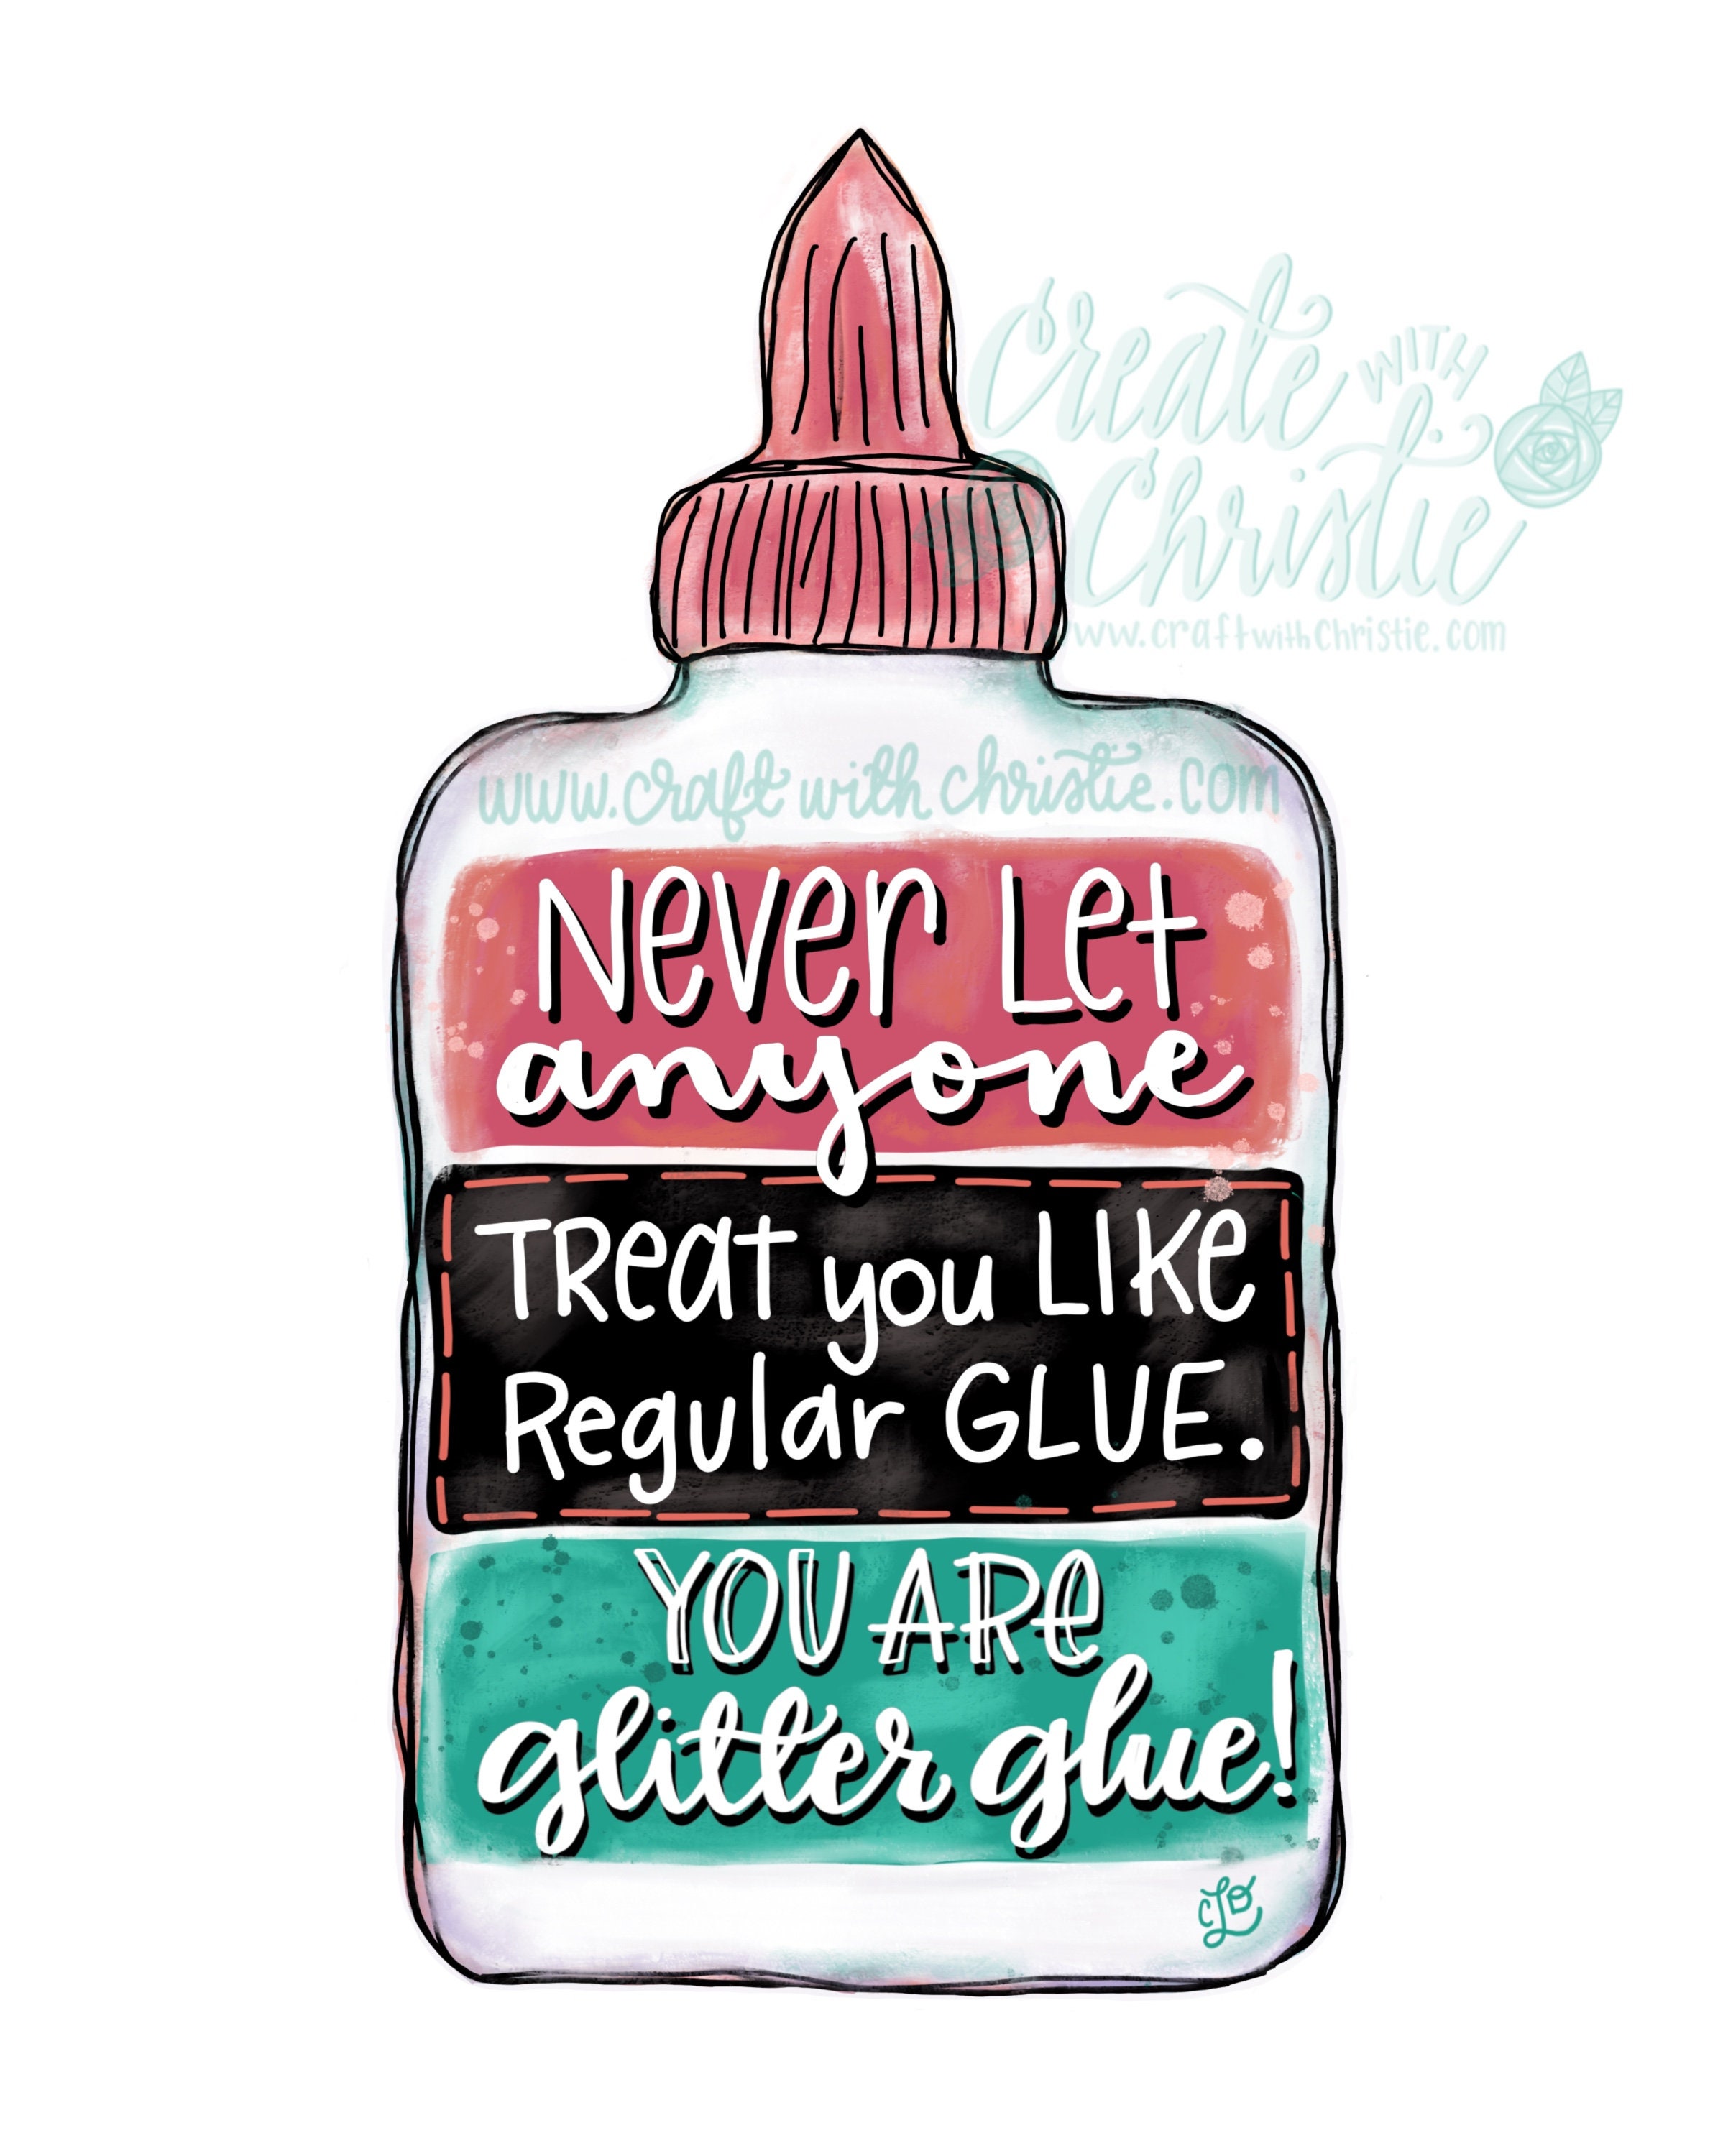 Never let anyone treat you like regular glue. You are Krystal